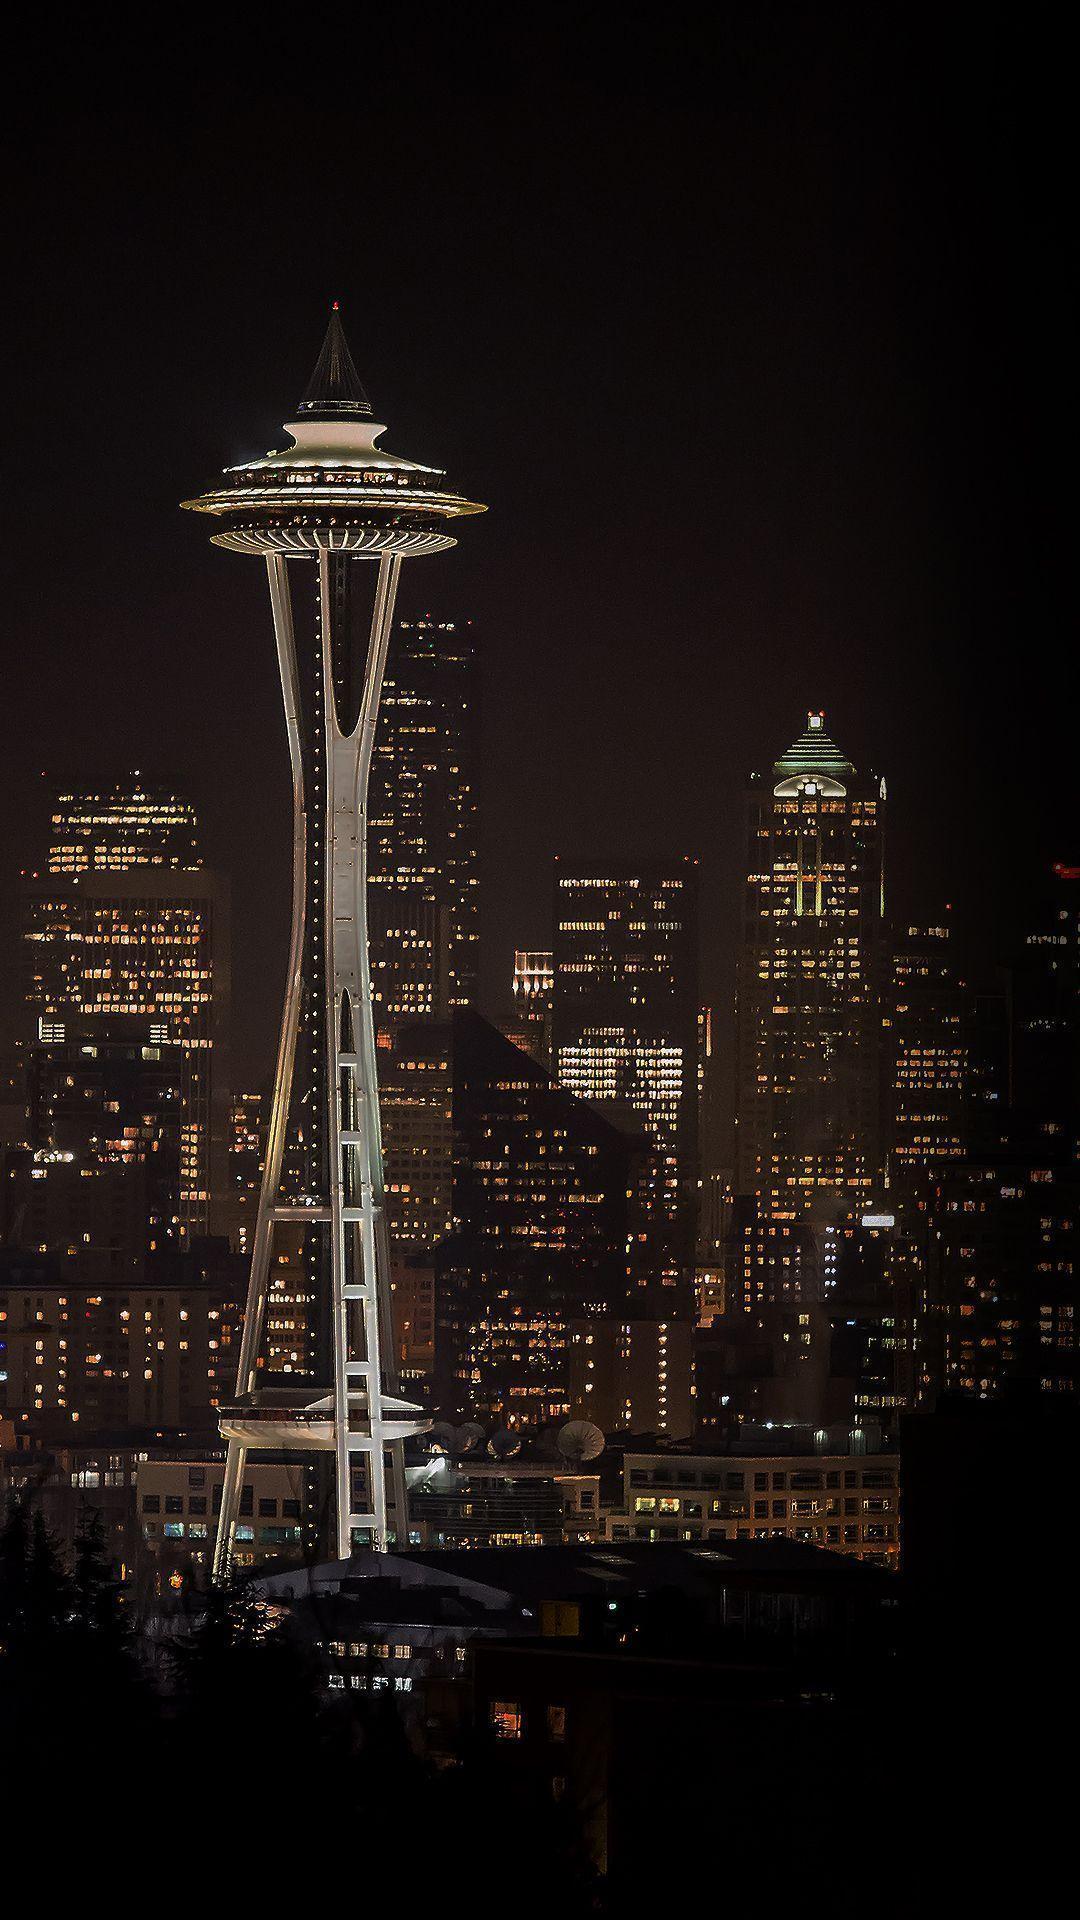 Seattle Night Light City Skyline Android Wallpaper free download